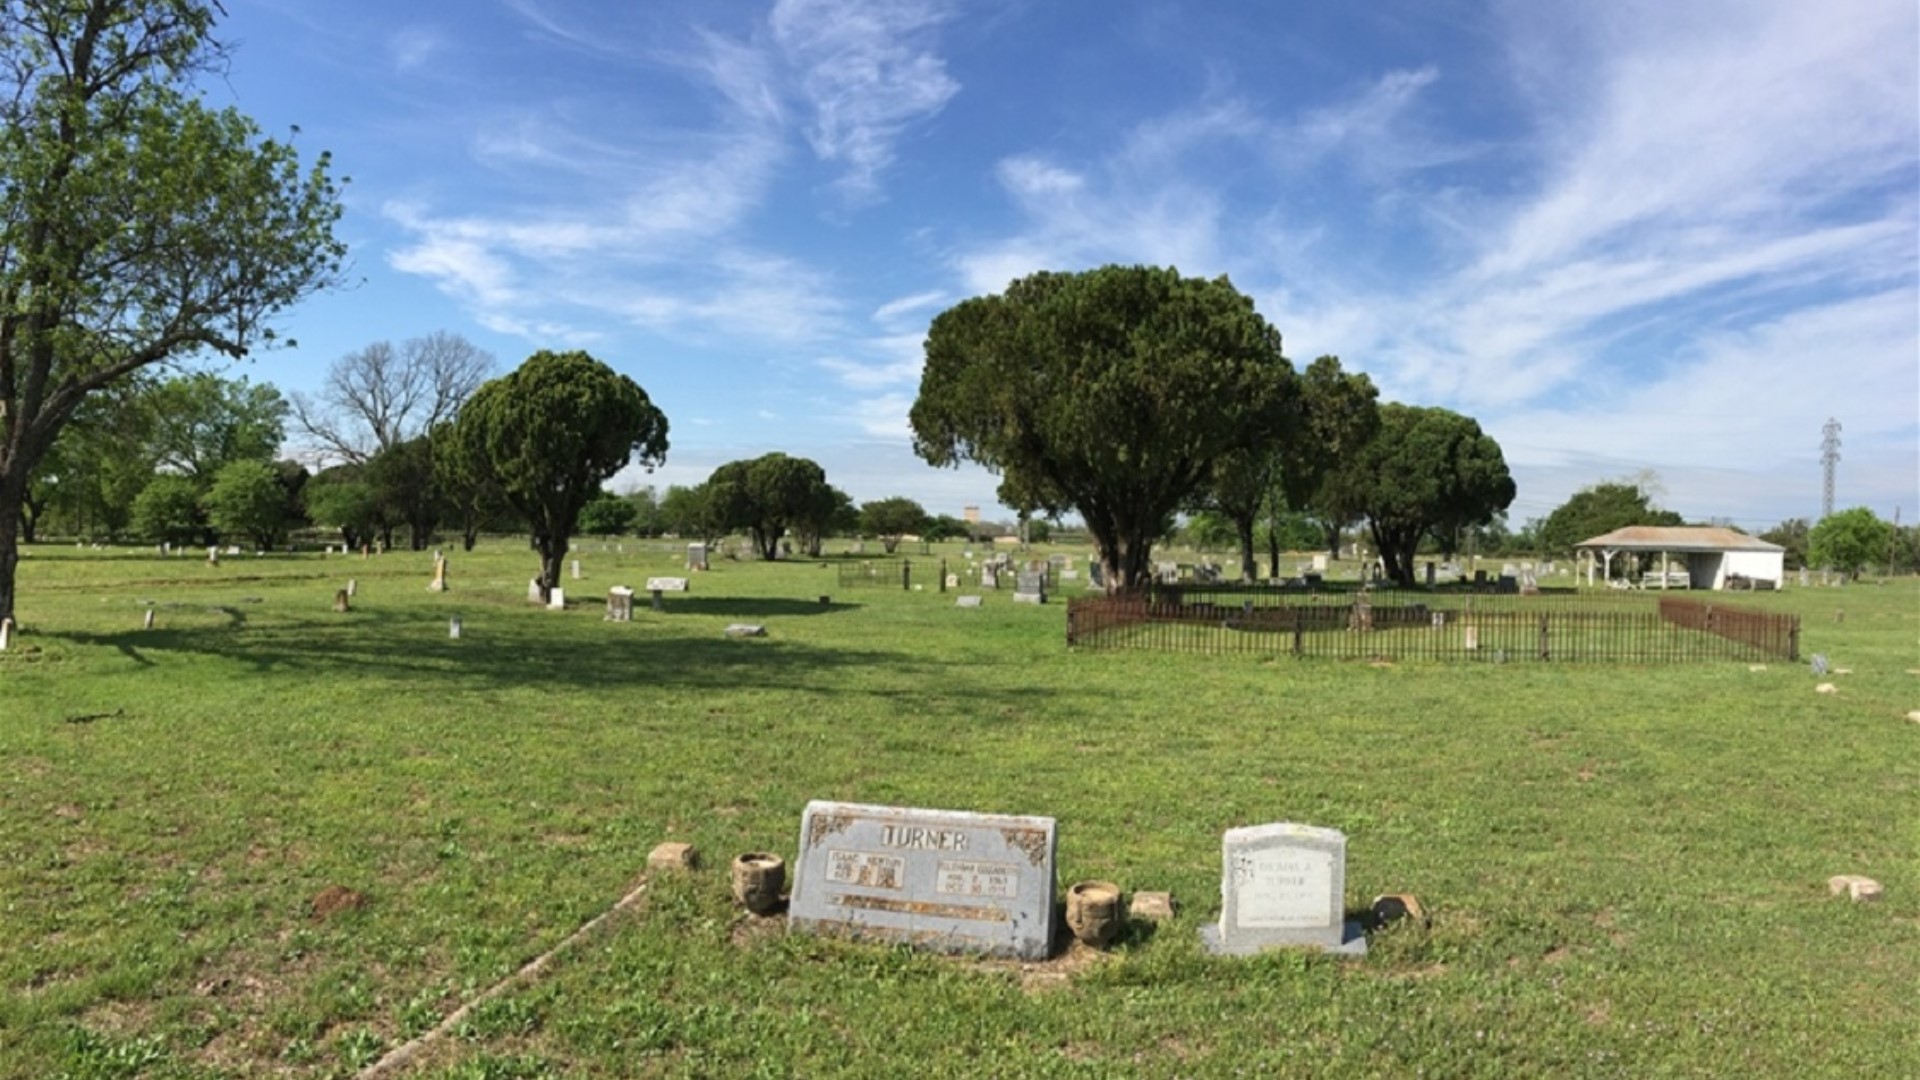 The cemetery recently received a $465K renovation. One local family visits the cemetery for the first time since the facelift.